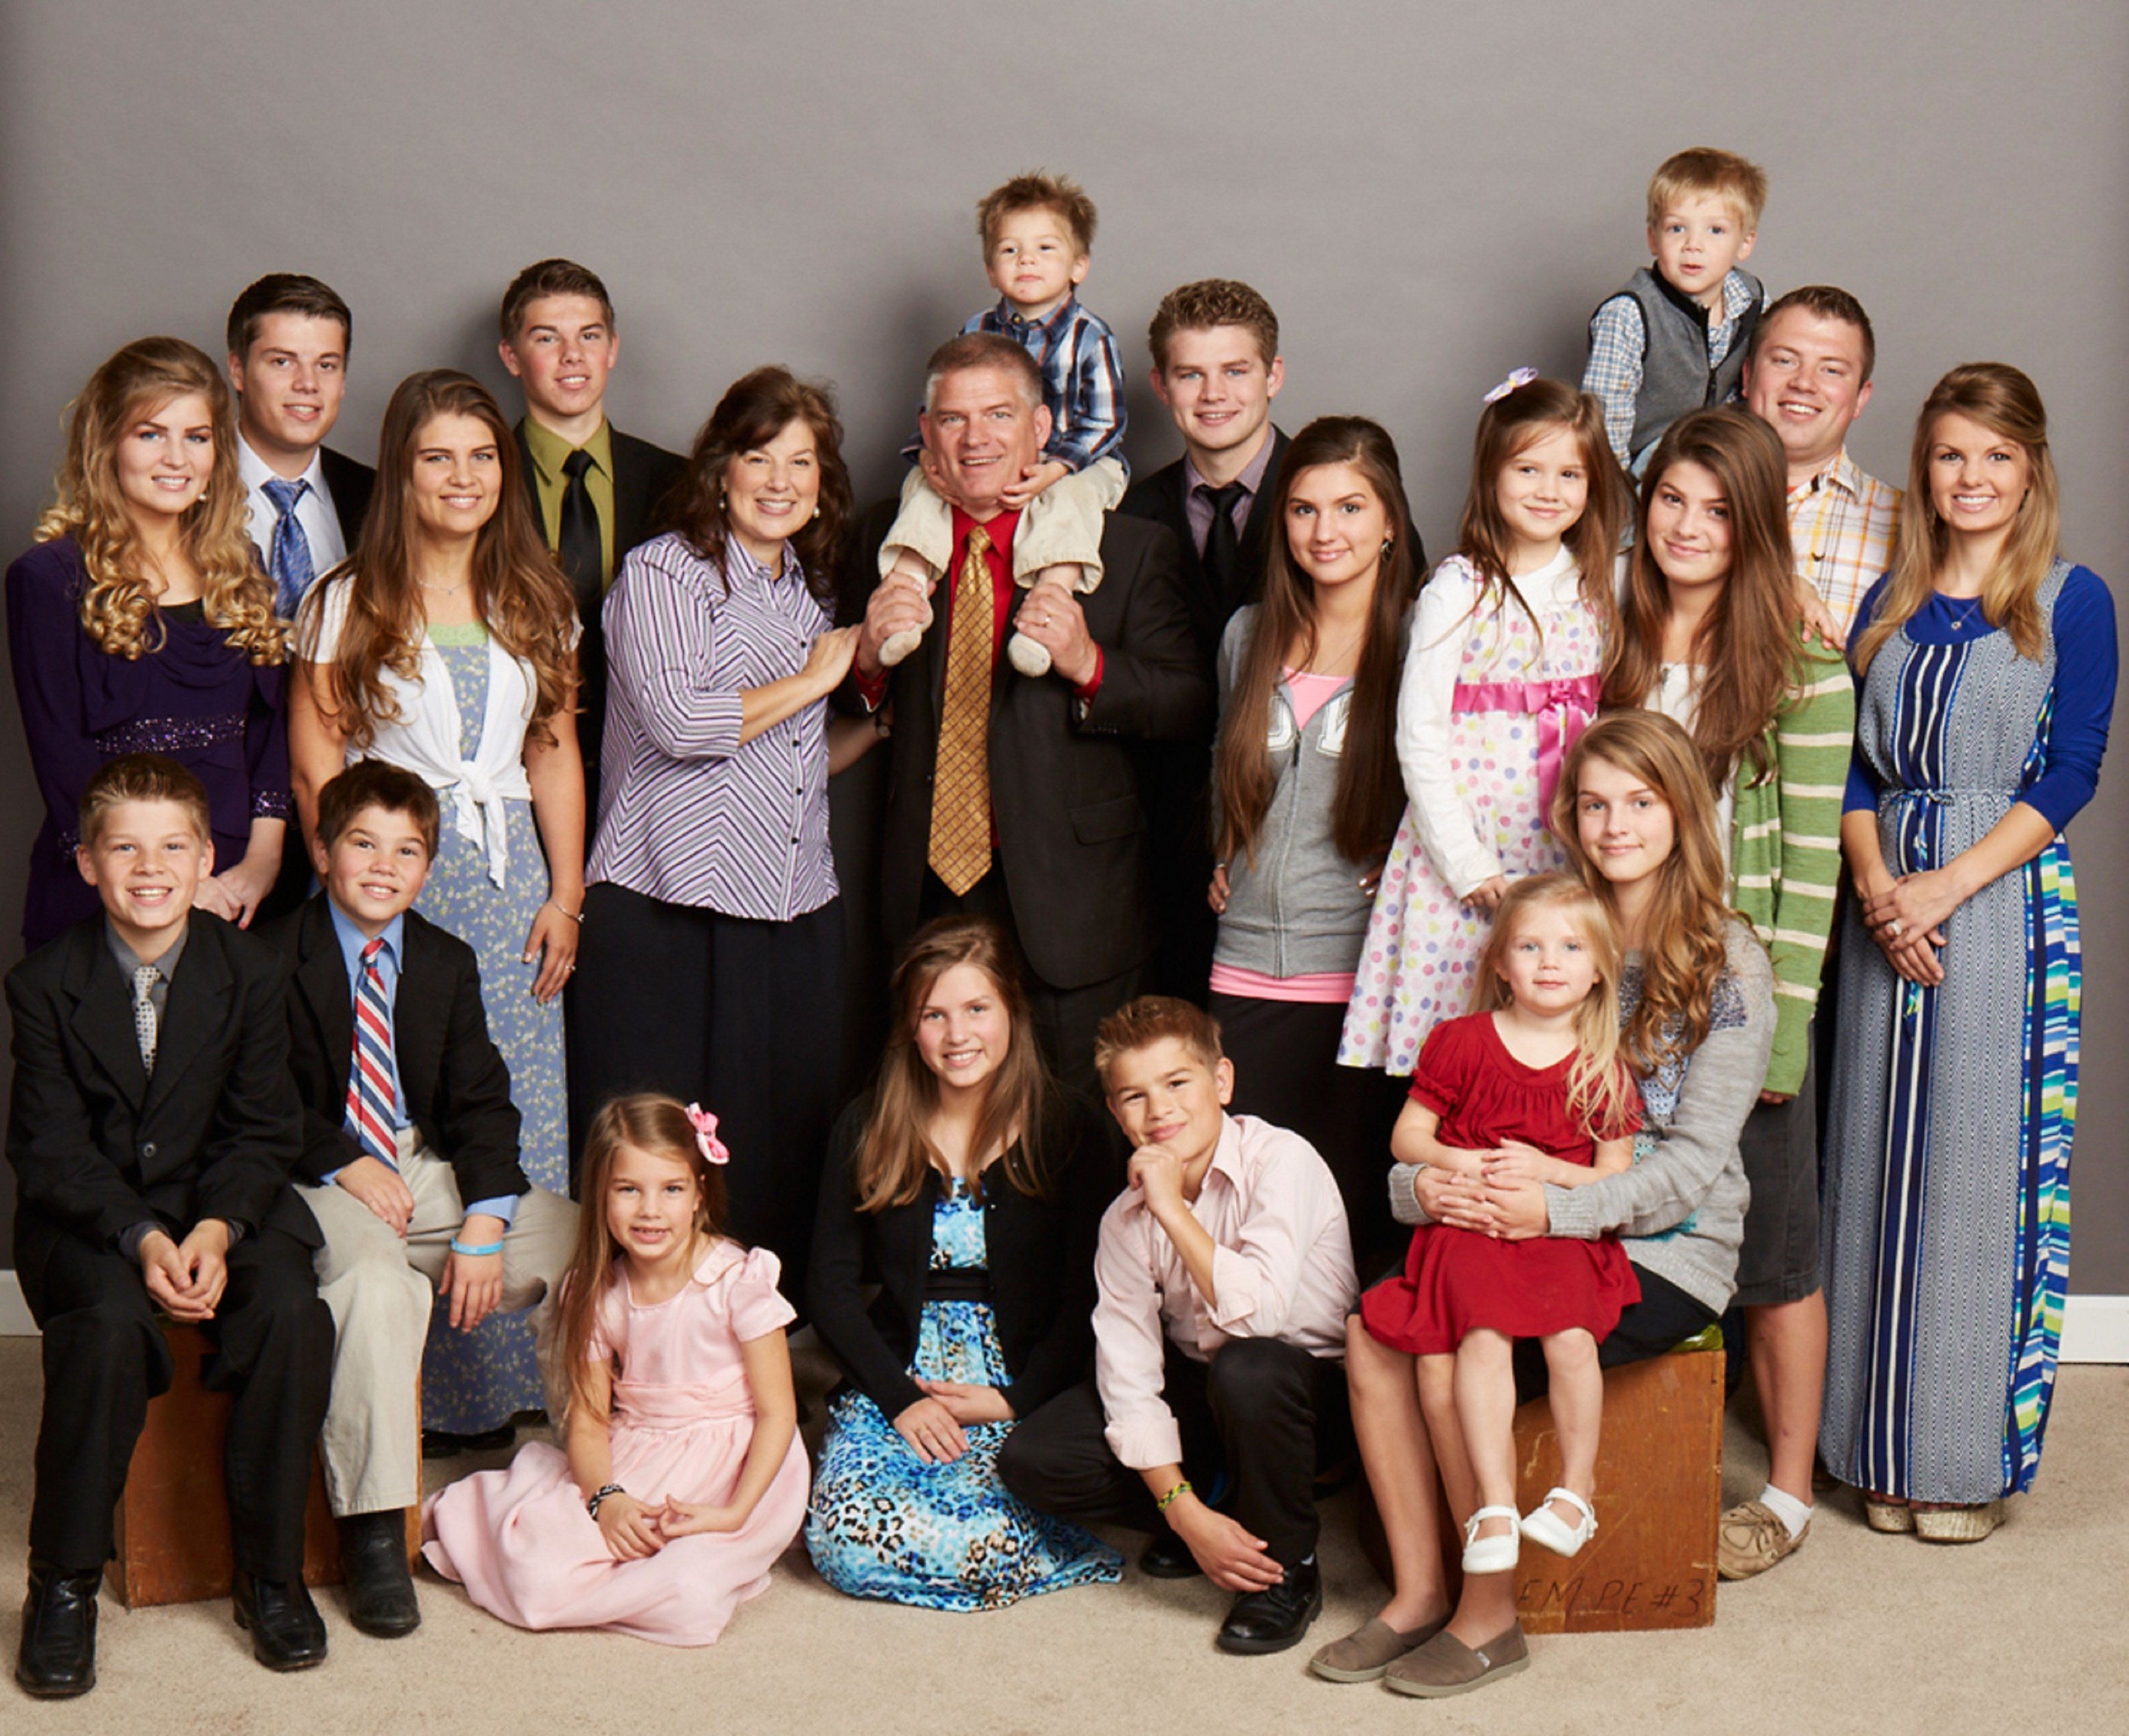 The bates family poses for a photo for their show 'Bringing Up Bates'